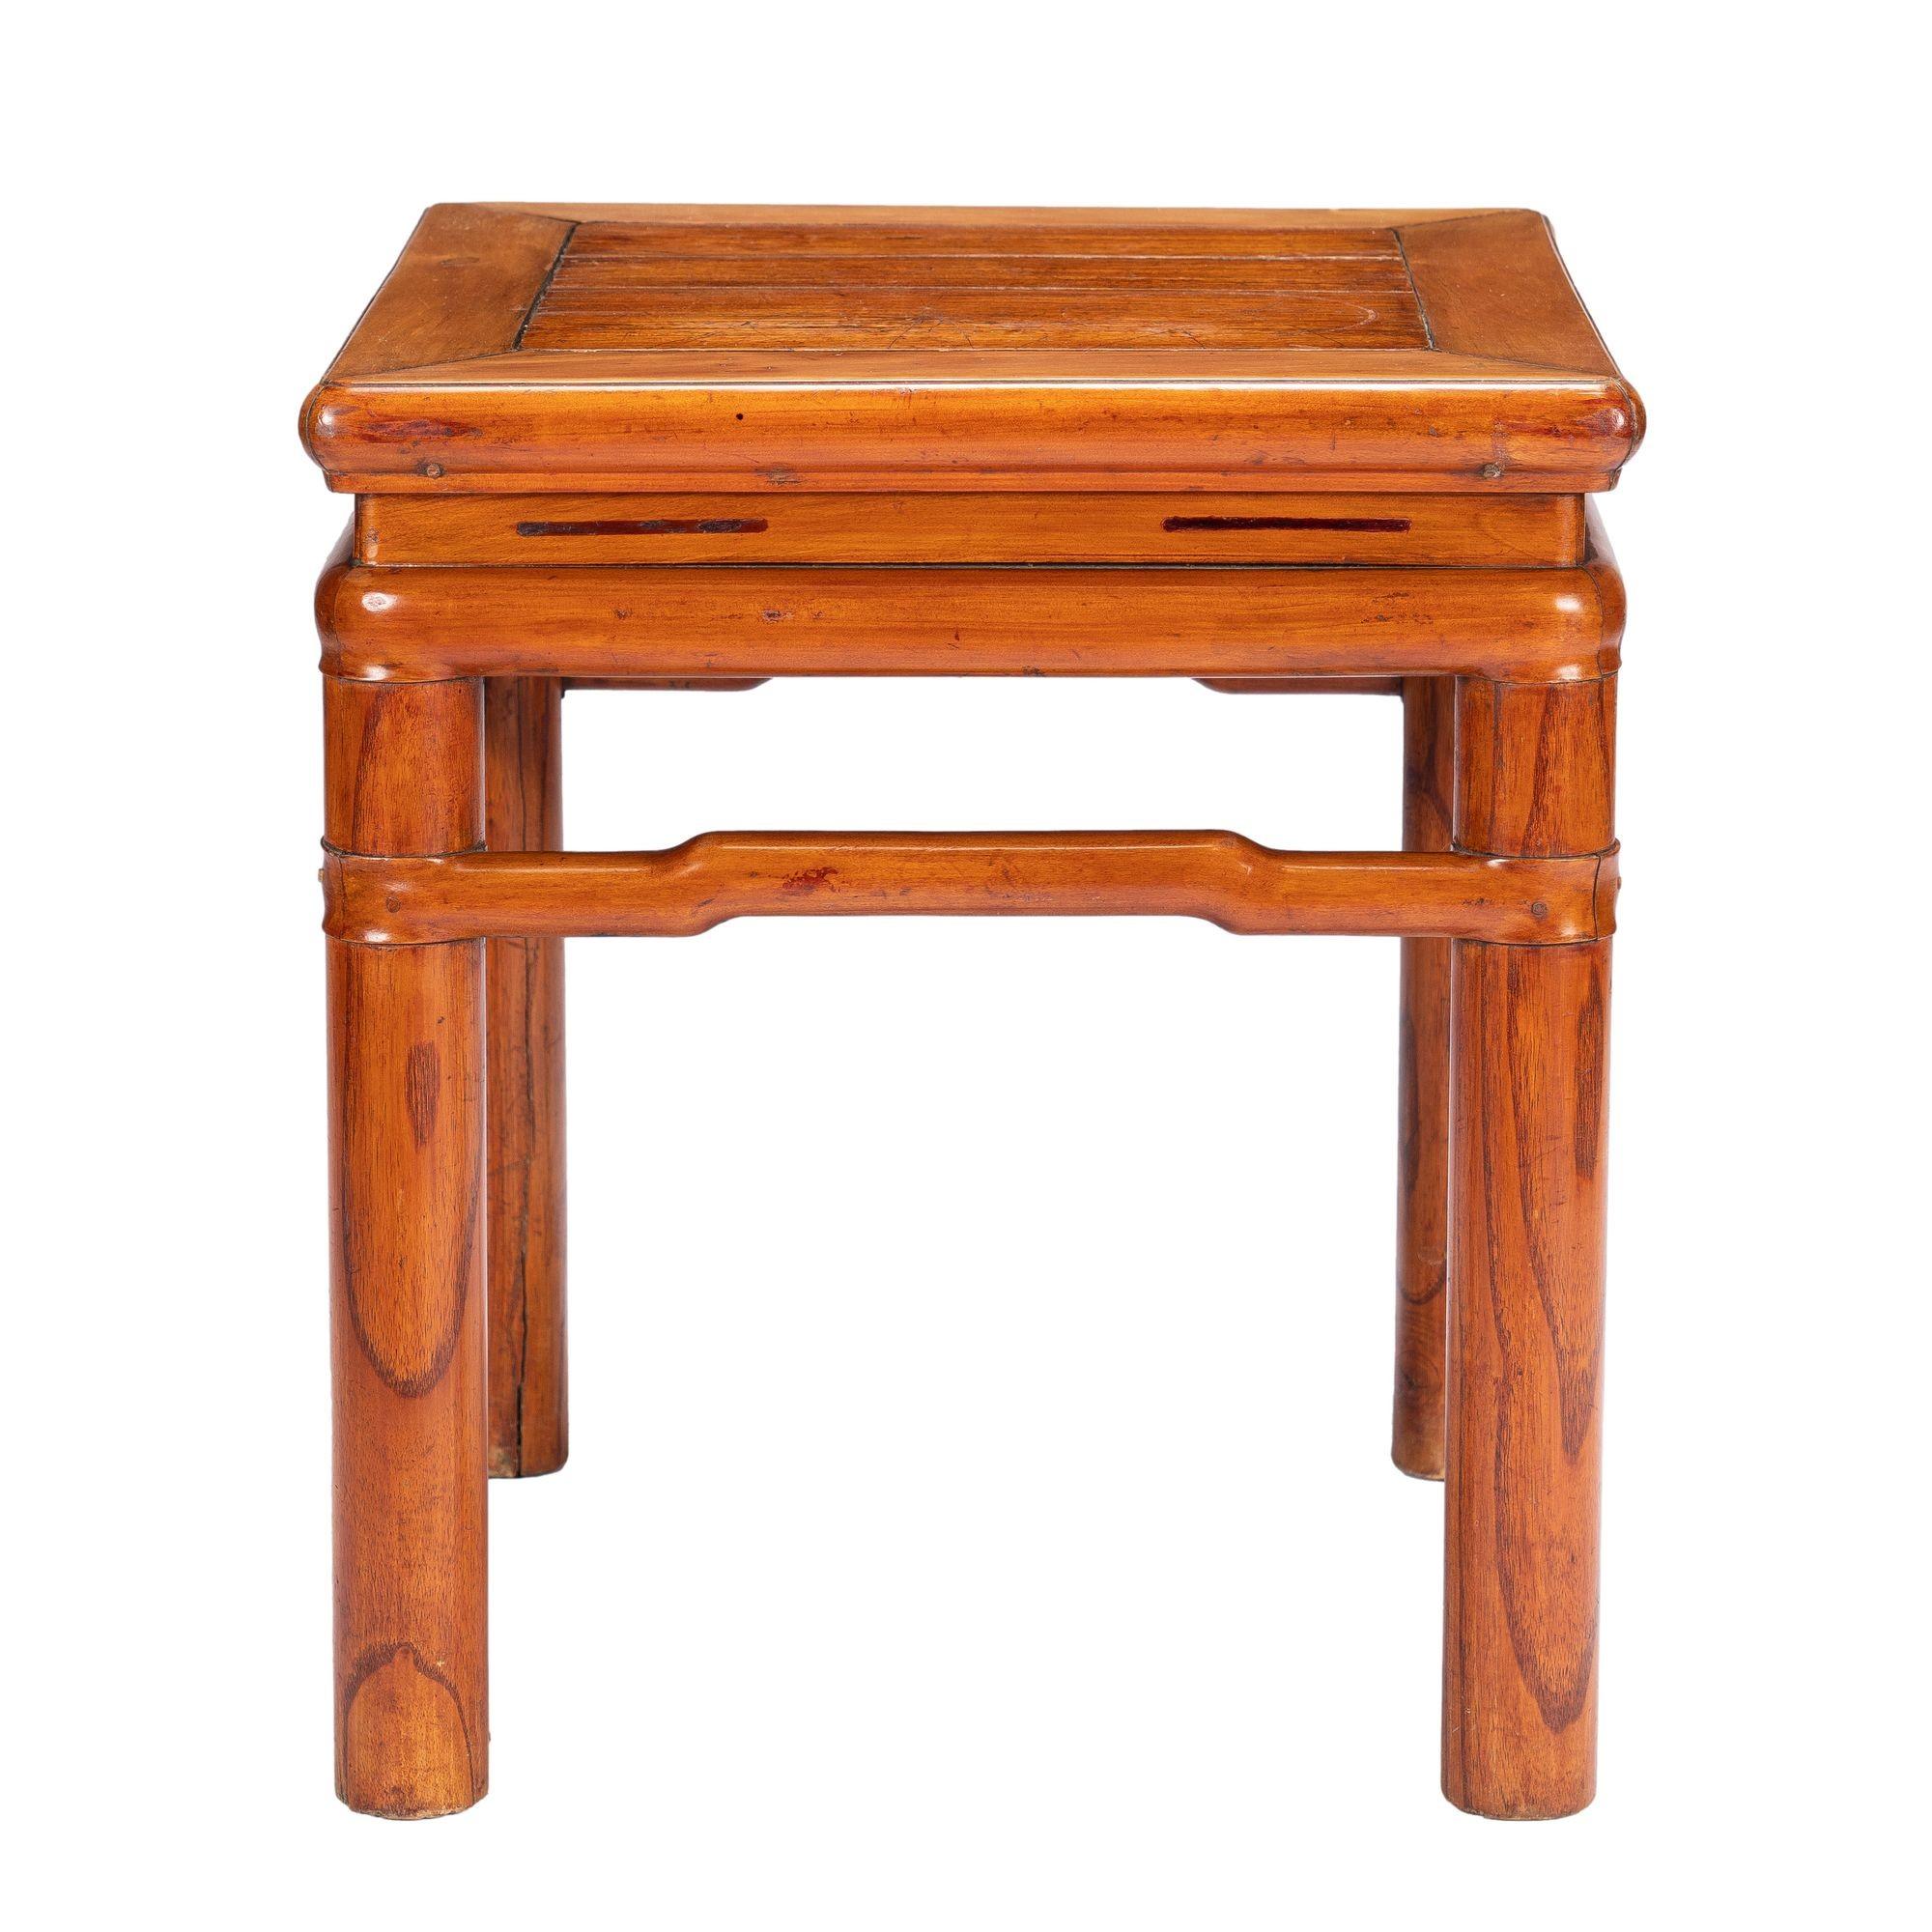 Chinese Yumu wood (Northern Chinese elm) stool in the Ming taste. The waisted and bull nose frame and panel top is engaged to the rounded framing elements including the leg posts. The legs are joined under the table frame with a continuous camel